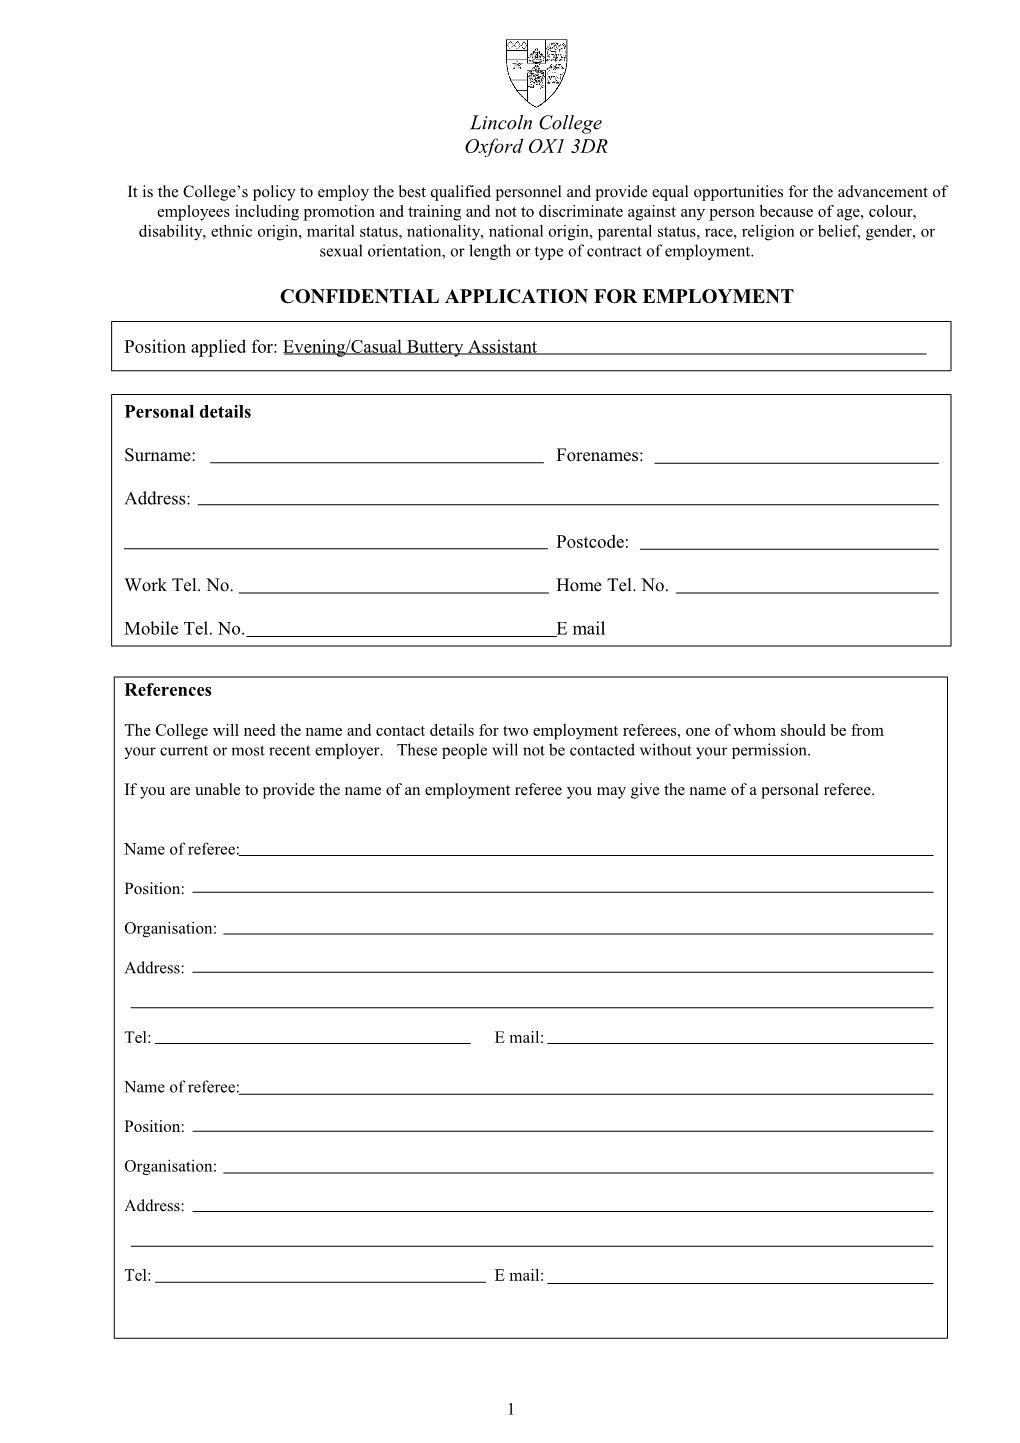 Confidential Application for Employment s2